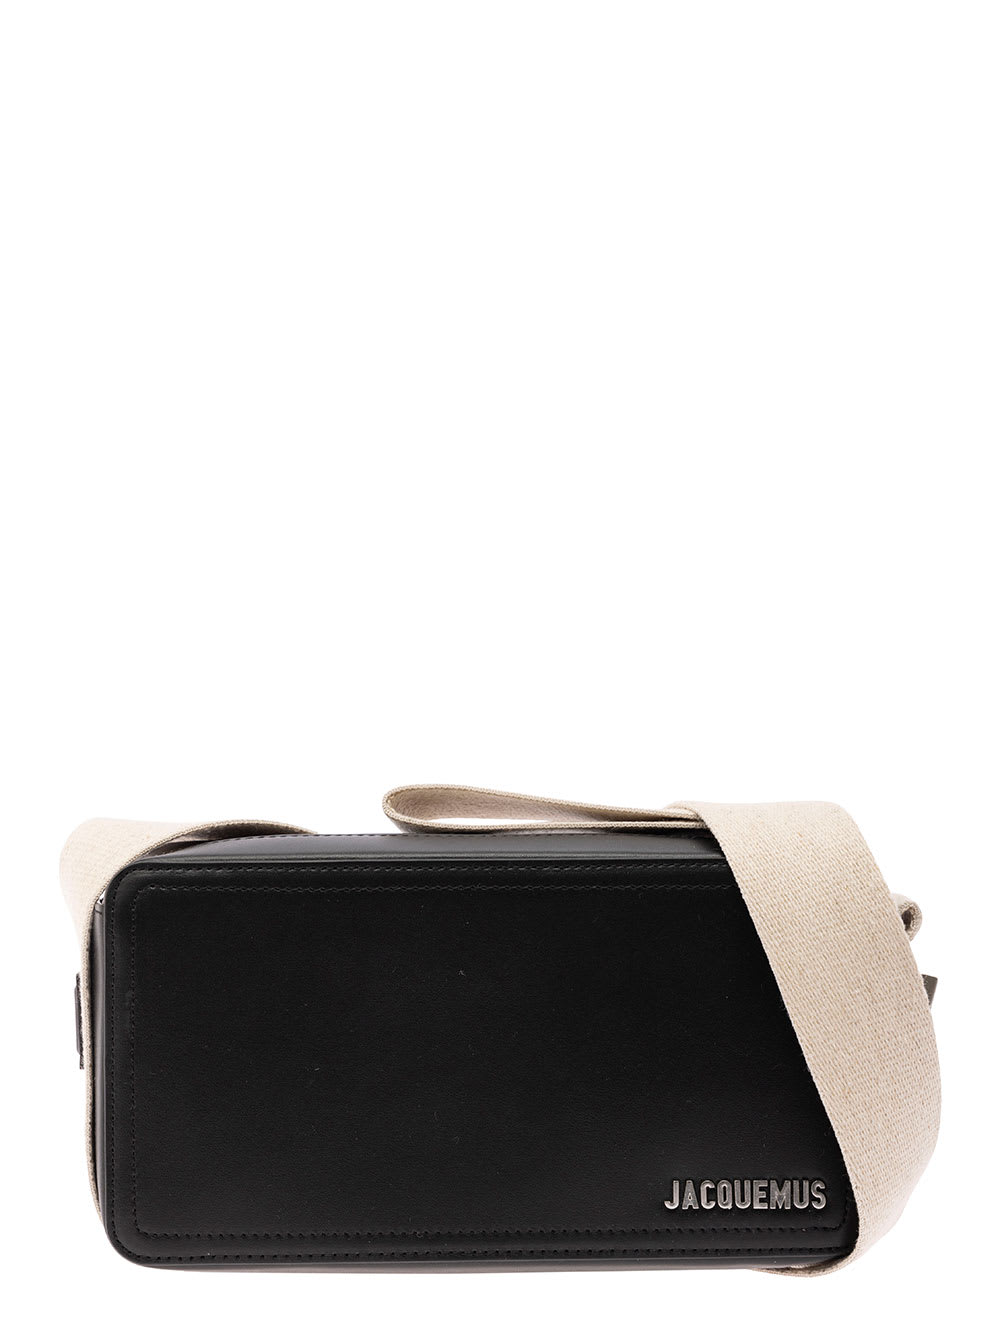 JACQUEMUS LE CUERDA HORIZONTAL BLACK SHOULDER BAG WITH LOGO IN RELIEF IN SMOOTH LEATHER MAN